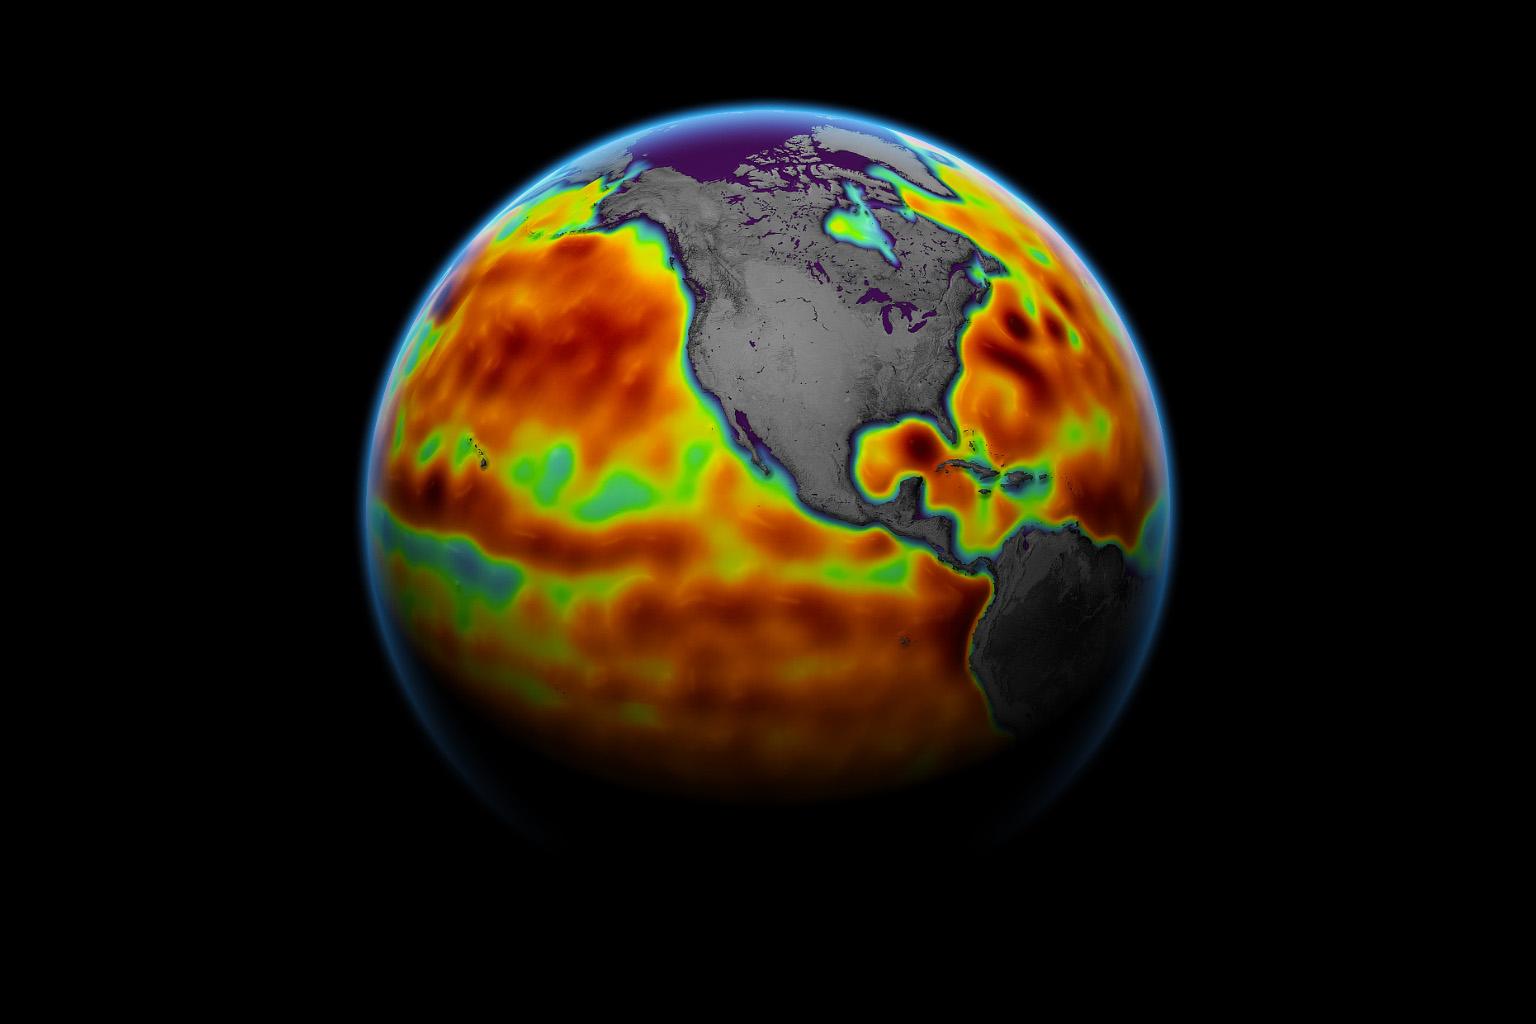 An image of sea level data on a globe, showing where the sea surface height is higher or lower.